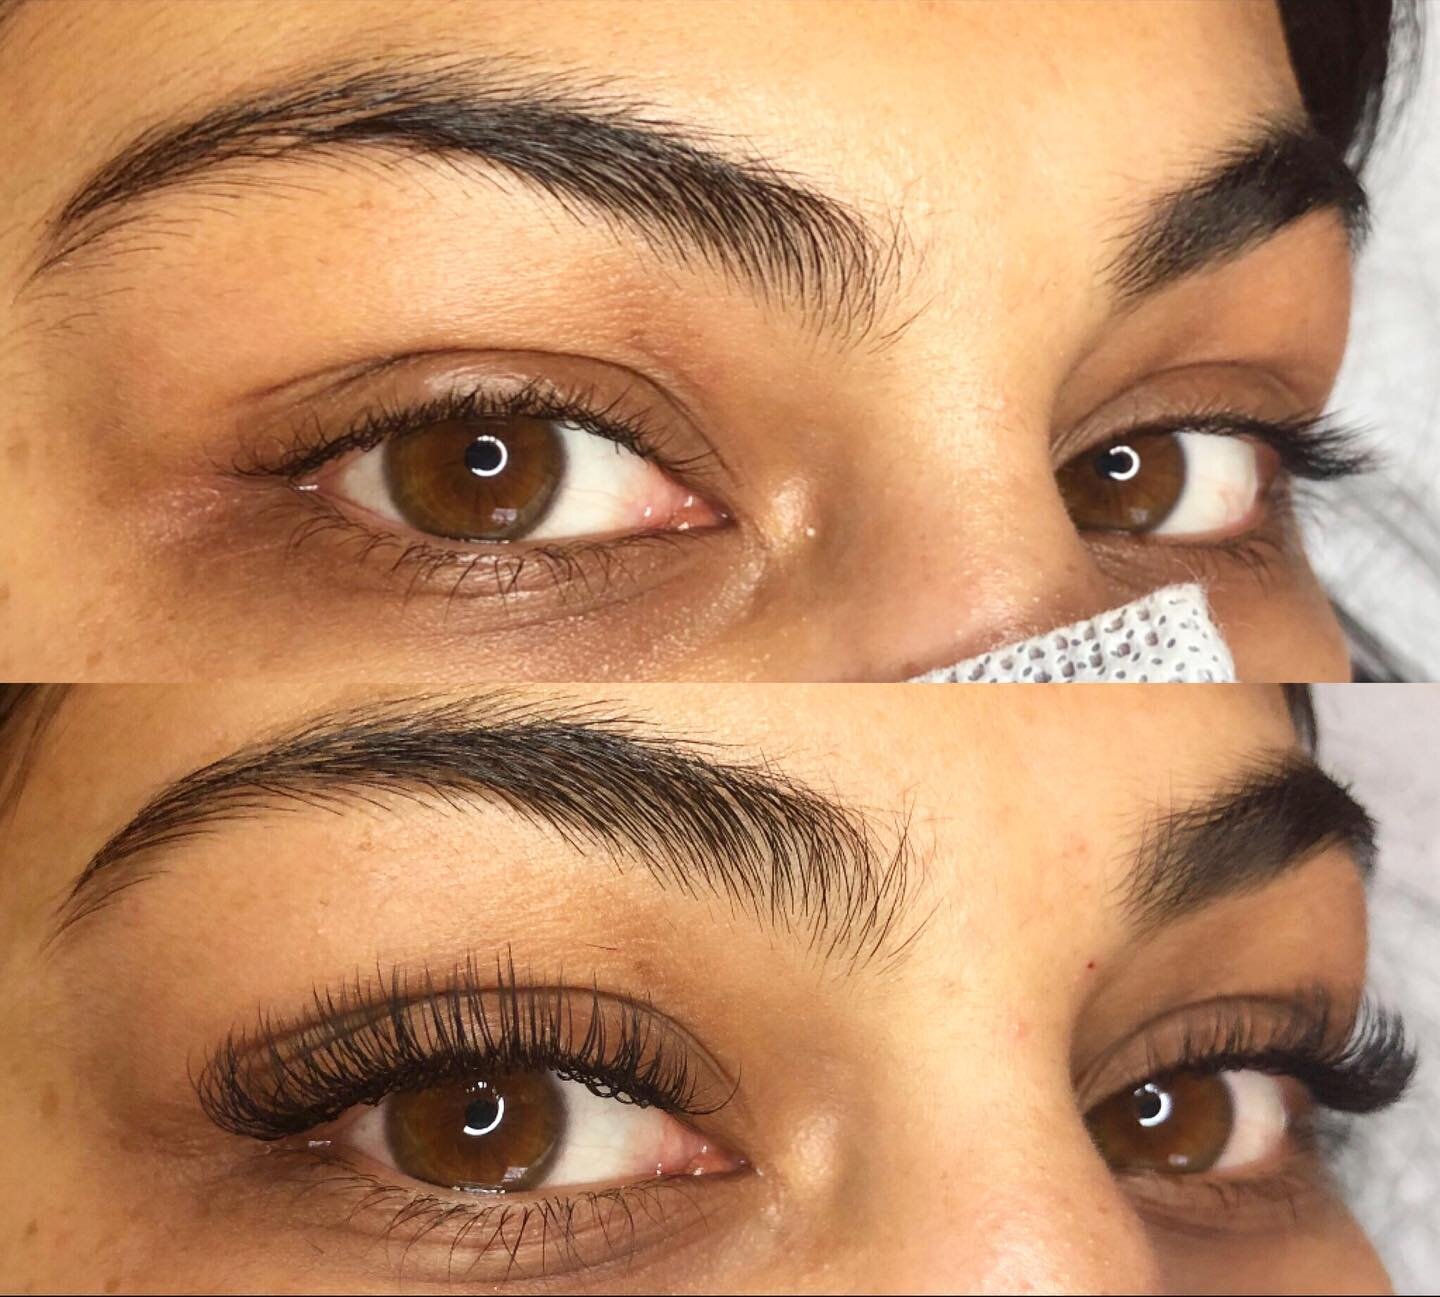 Before and after full set of classics and a quick brown thread 🥰🙏🏻
.
.
.

To Get Lashed:

via my Instagram &ldquo;Book&rdquo; button 

Come in and have a full consultation to discuss what, length, thickness and style will best suit you and meet yo